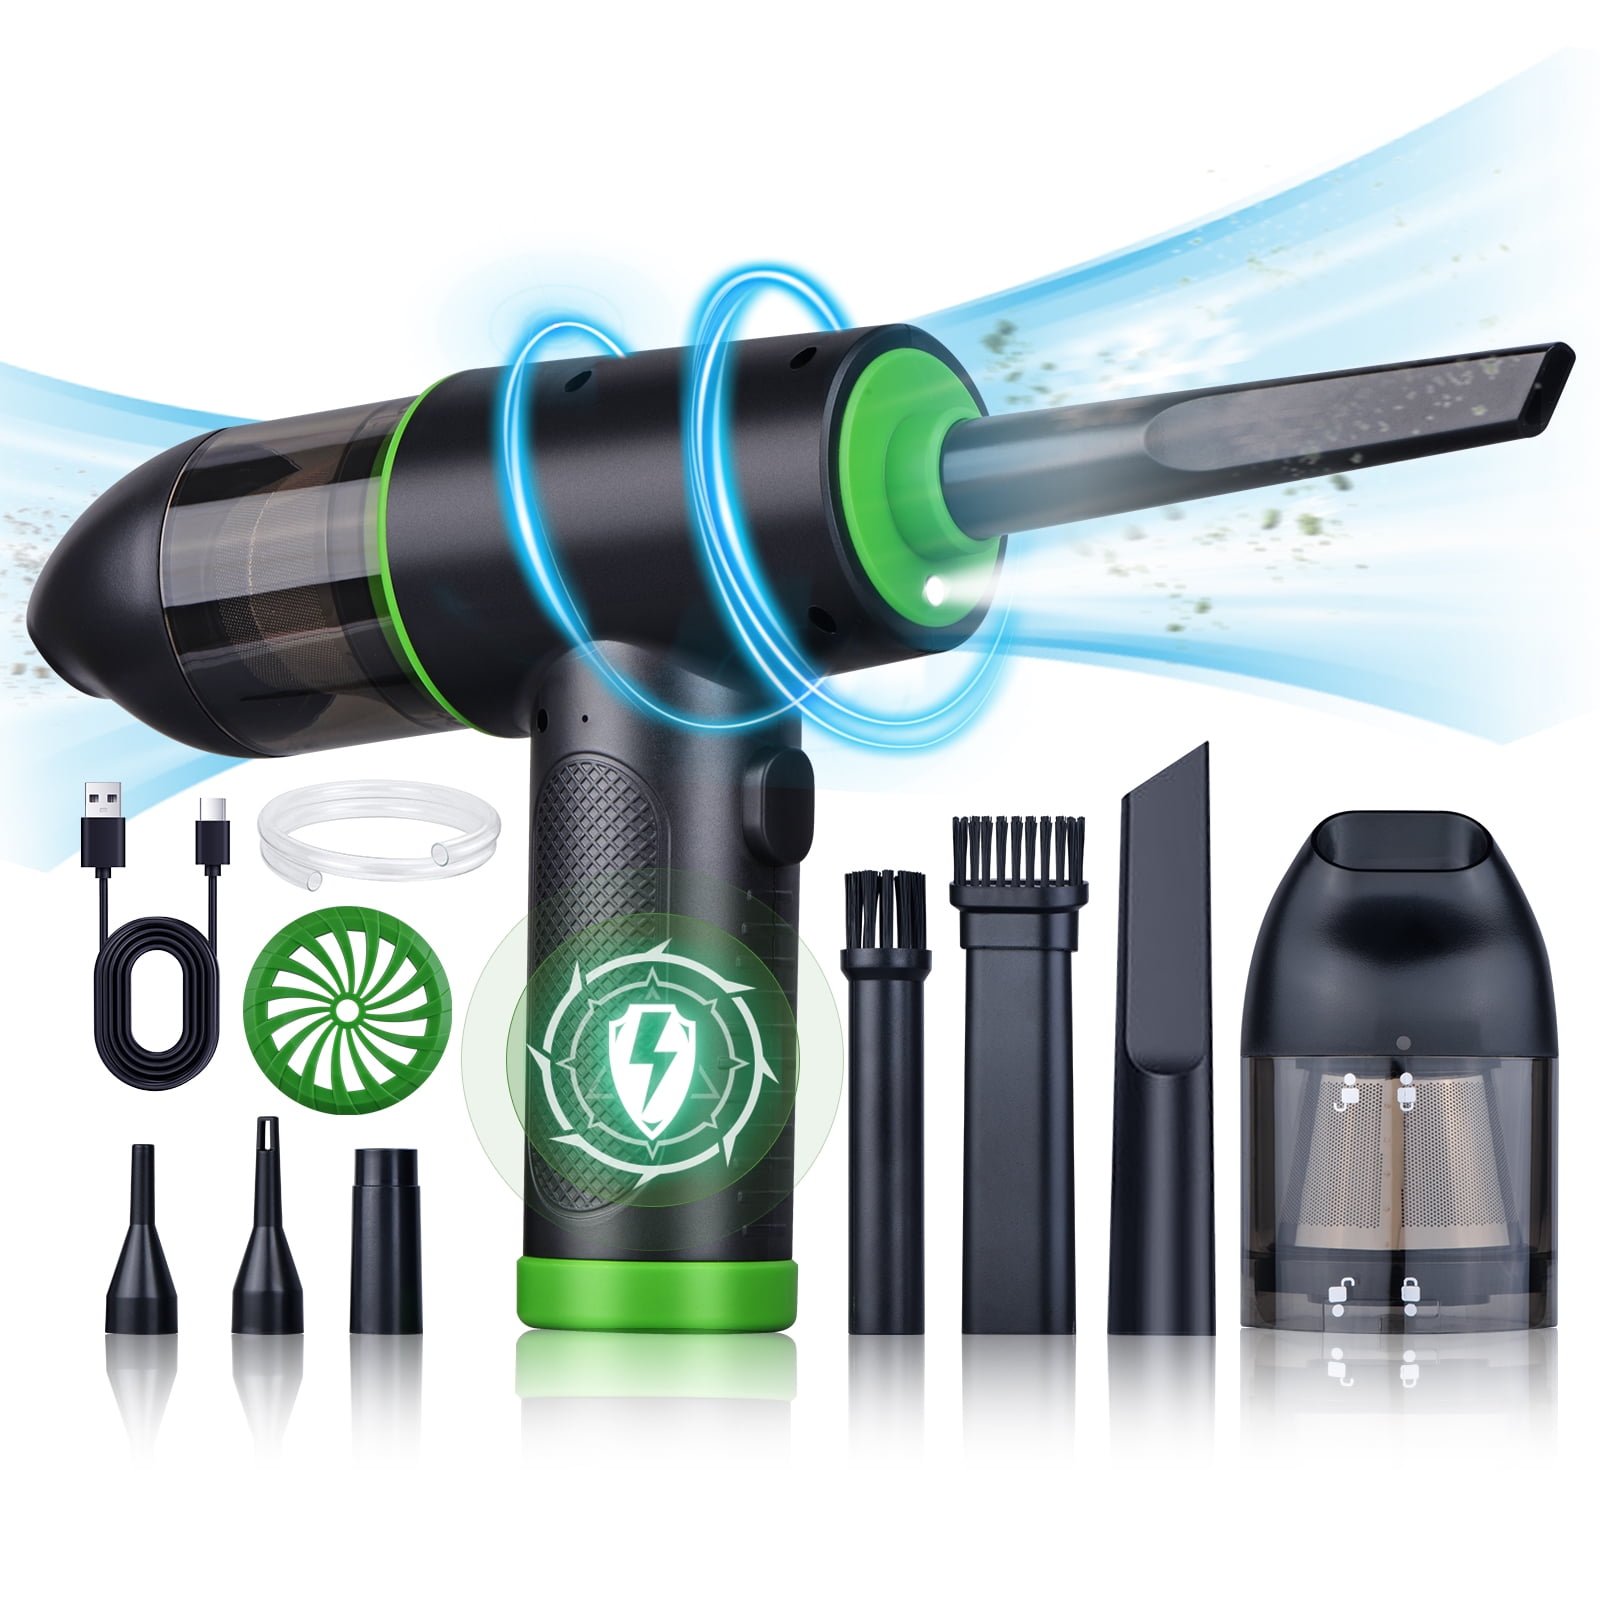  Compressed Air - Keyboard Cleaner - 3 in 1 Electric Air Duster  & Mini Computer Vacuum & Cordless Inflating Swimming Pool - Canned Air  Blower Dust Off for Electronic,Office,Home Cleaning : Electronics